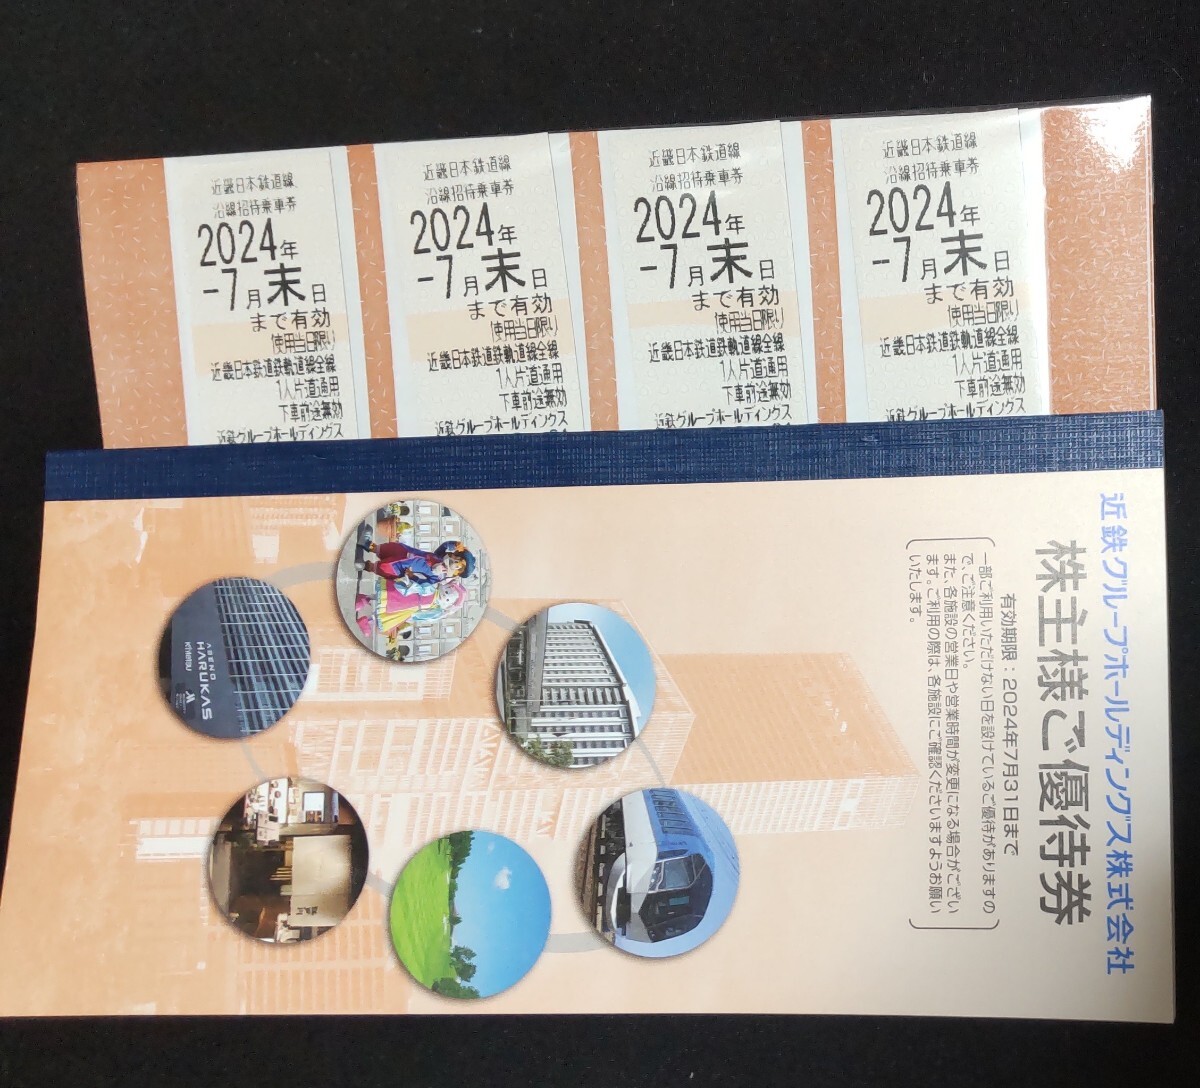  Kinki Japan railroad close iron stockholder hospitality passenger ticket 4 pieces set hospitality booklet attaching have efficacy time limit 2024 year 7 end of the month day free shipping 